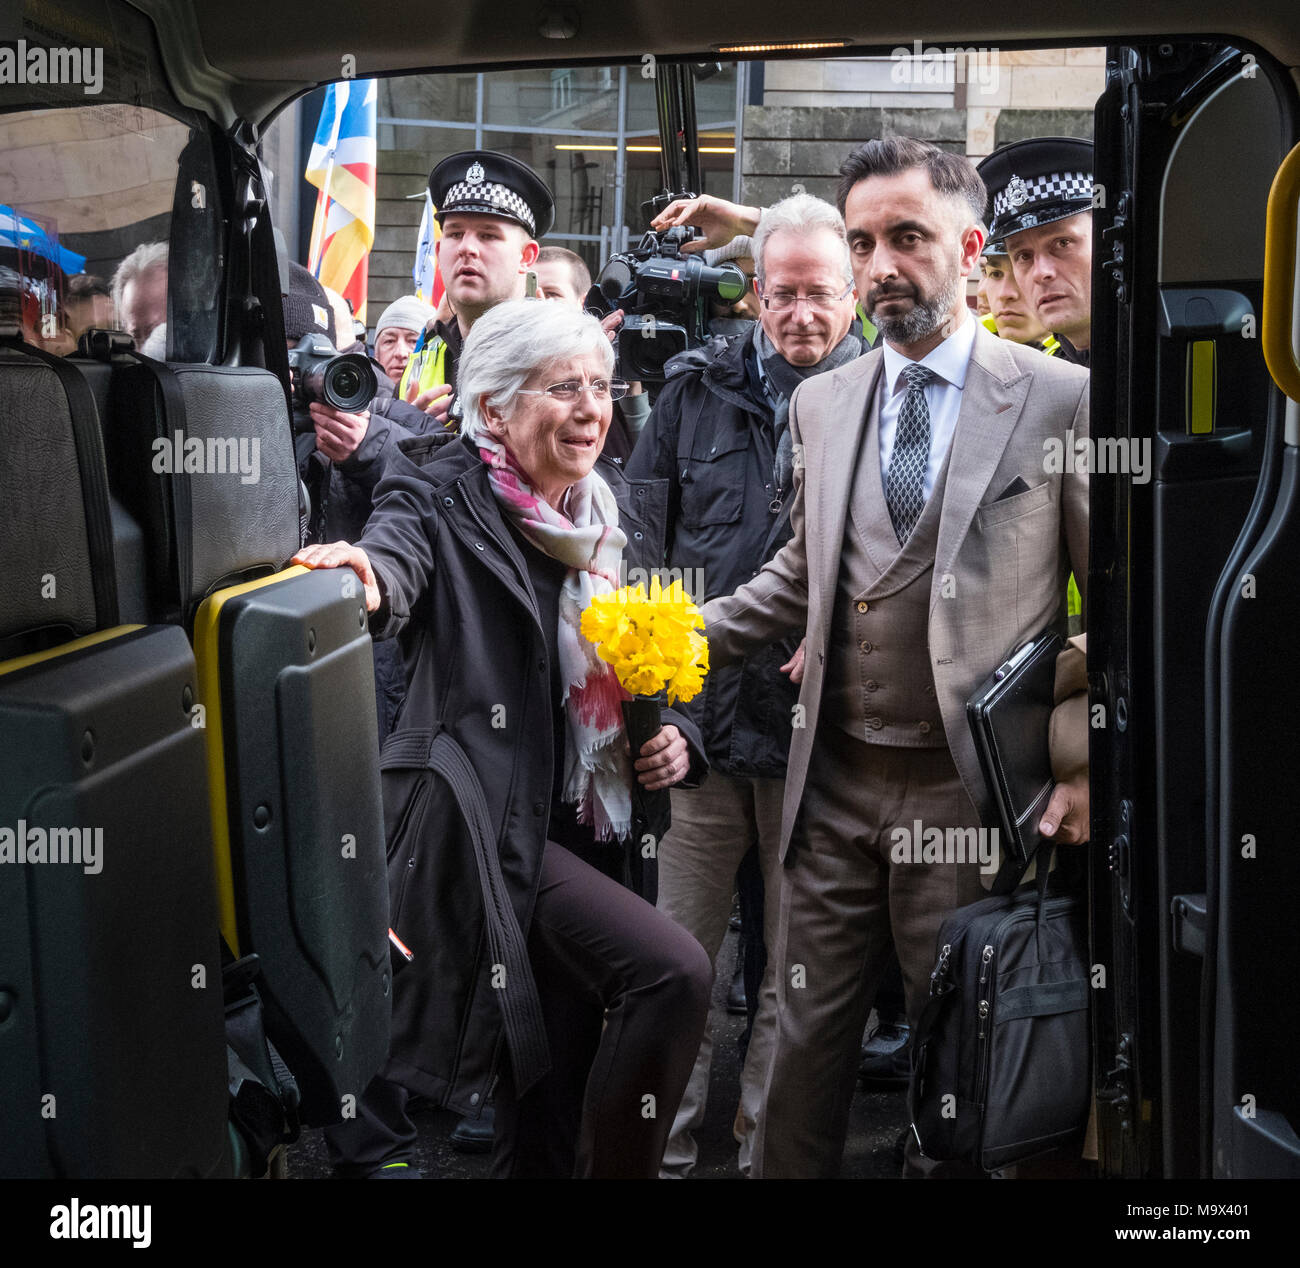 Edinburgh, Scotland,UK. 28 March 2018. former Catalonia Education Minister and independence supporter Clara Ponsati gets into taxi at Edinburgh Sheriff Court after her bail hearing. Ponsati faces extradition to Spain. She was granted bail. Credit: Iain Masterton/Alamy Live News Stock Photo